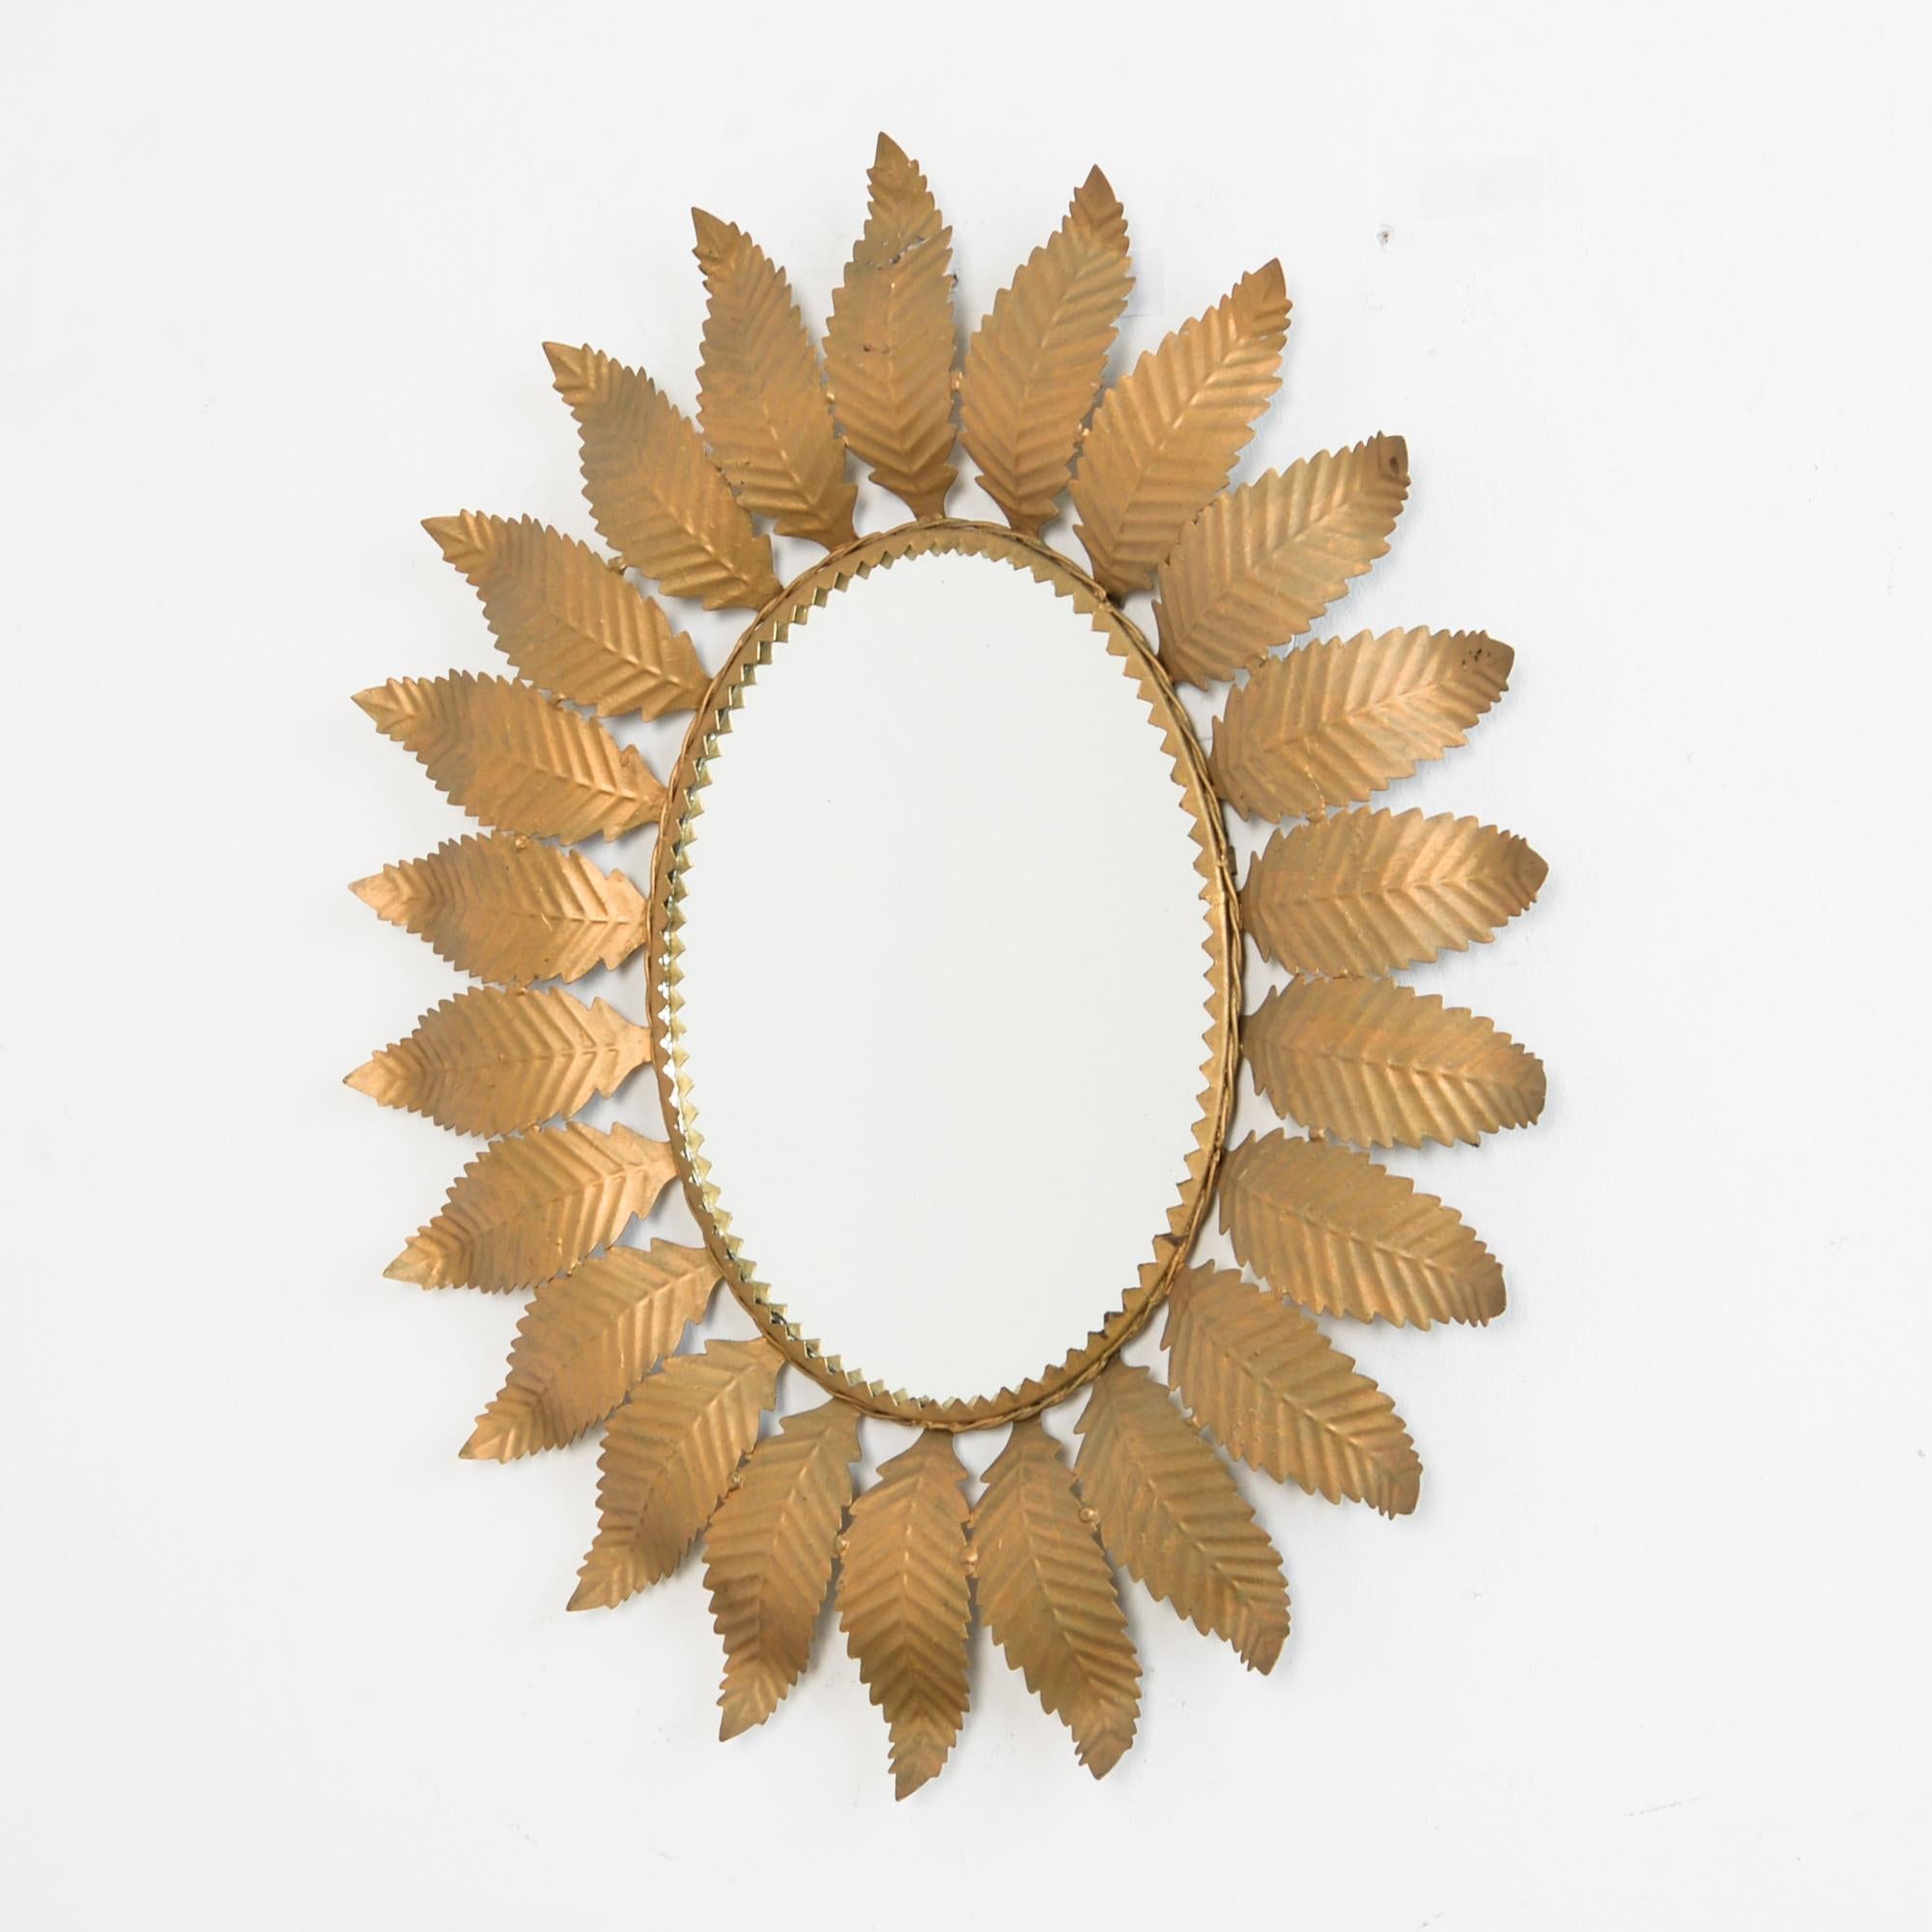 From Spain, circa 1960, an oval mirror framed by beaten metal leaves. With a rose gold tinted finish. A typical ‘1960s Spanish style plays on repetition, Baroque ornament, folk technique, and midcentury geometry. Chic and bohemian accent.